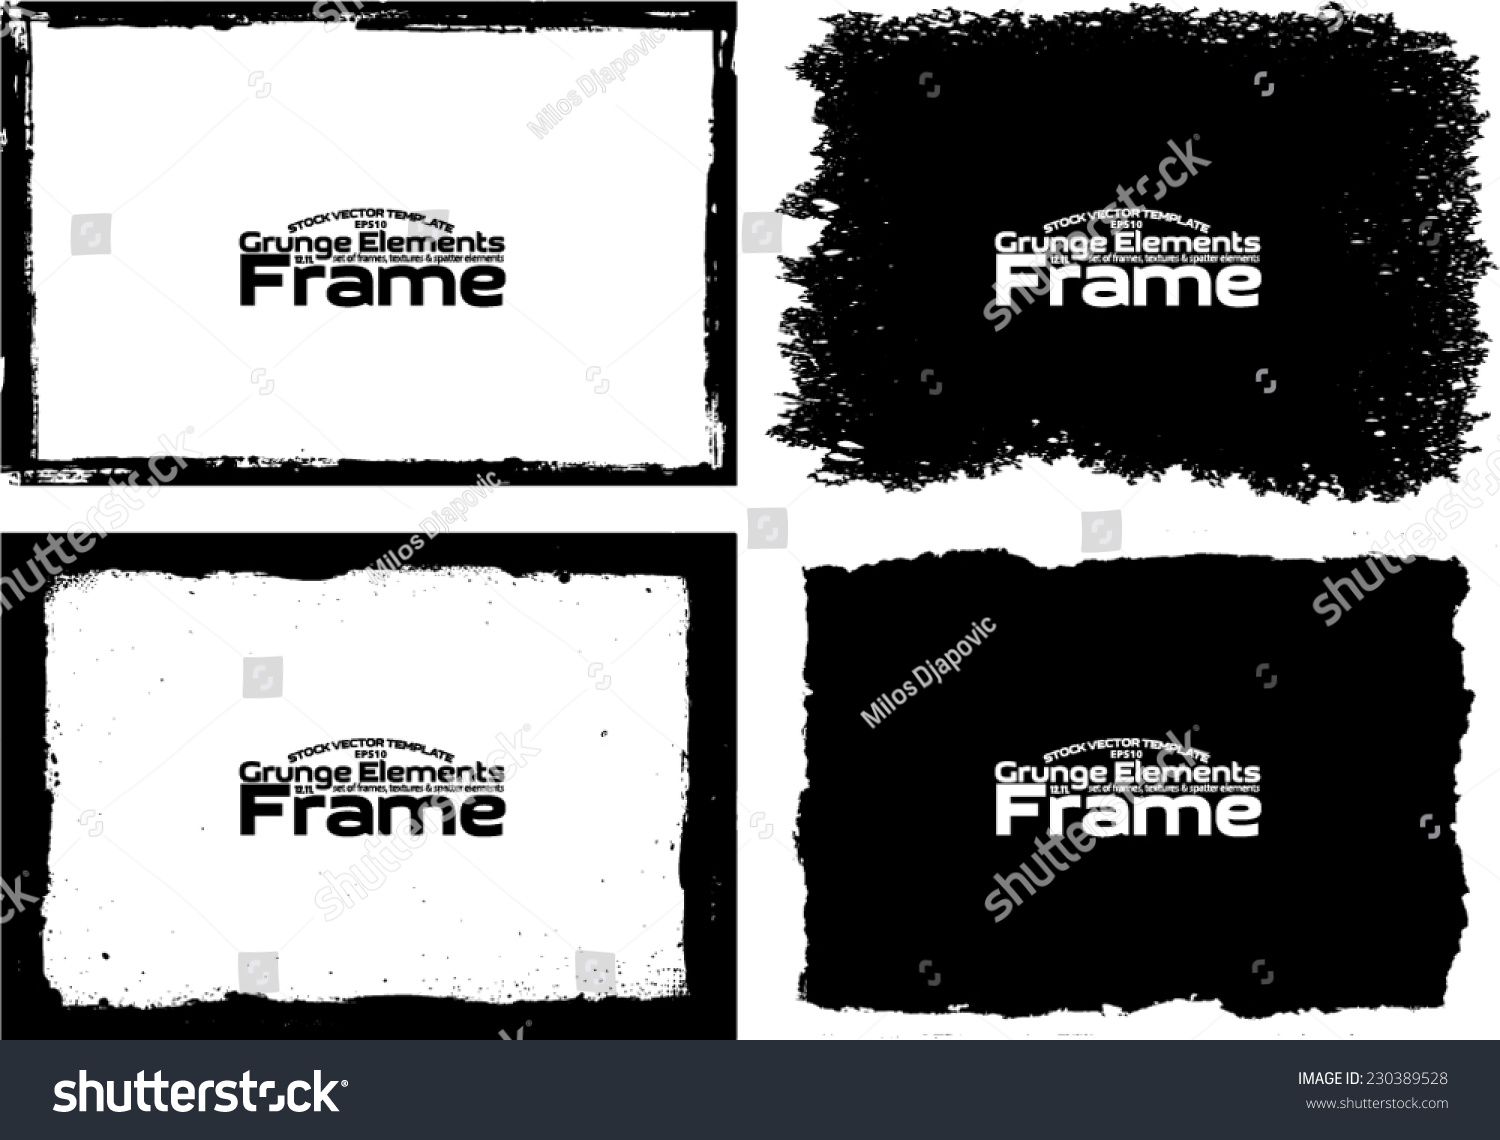 Grunge frame set texture - Abstract design template. Stock vector set - easy to use #230389528